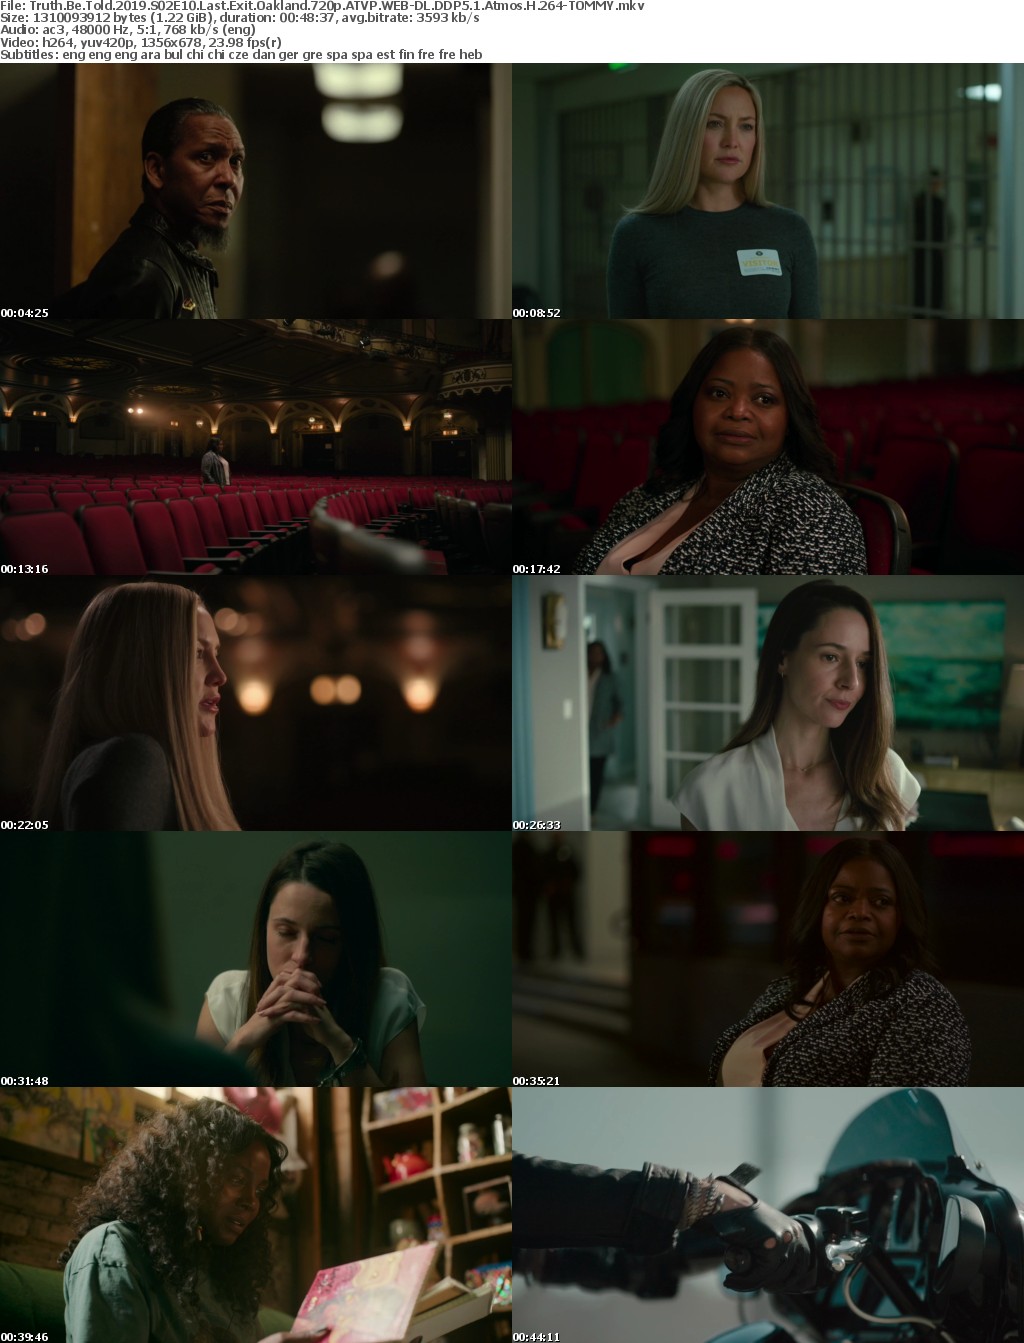 Truth Be Told 2019 S02E10 Last Exit Oakland 720p ATVP WEBRip DDP5 1 x264-TOMMY